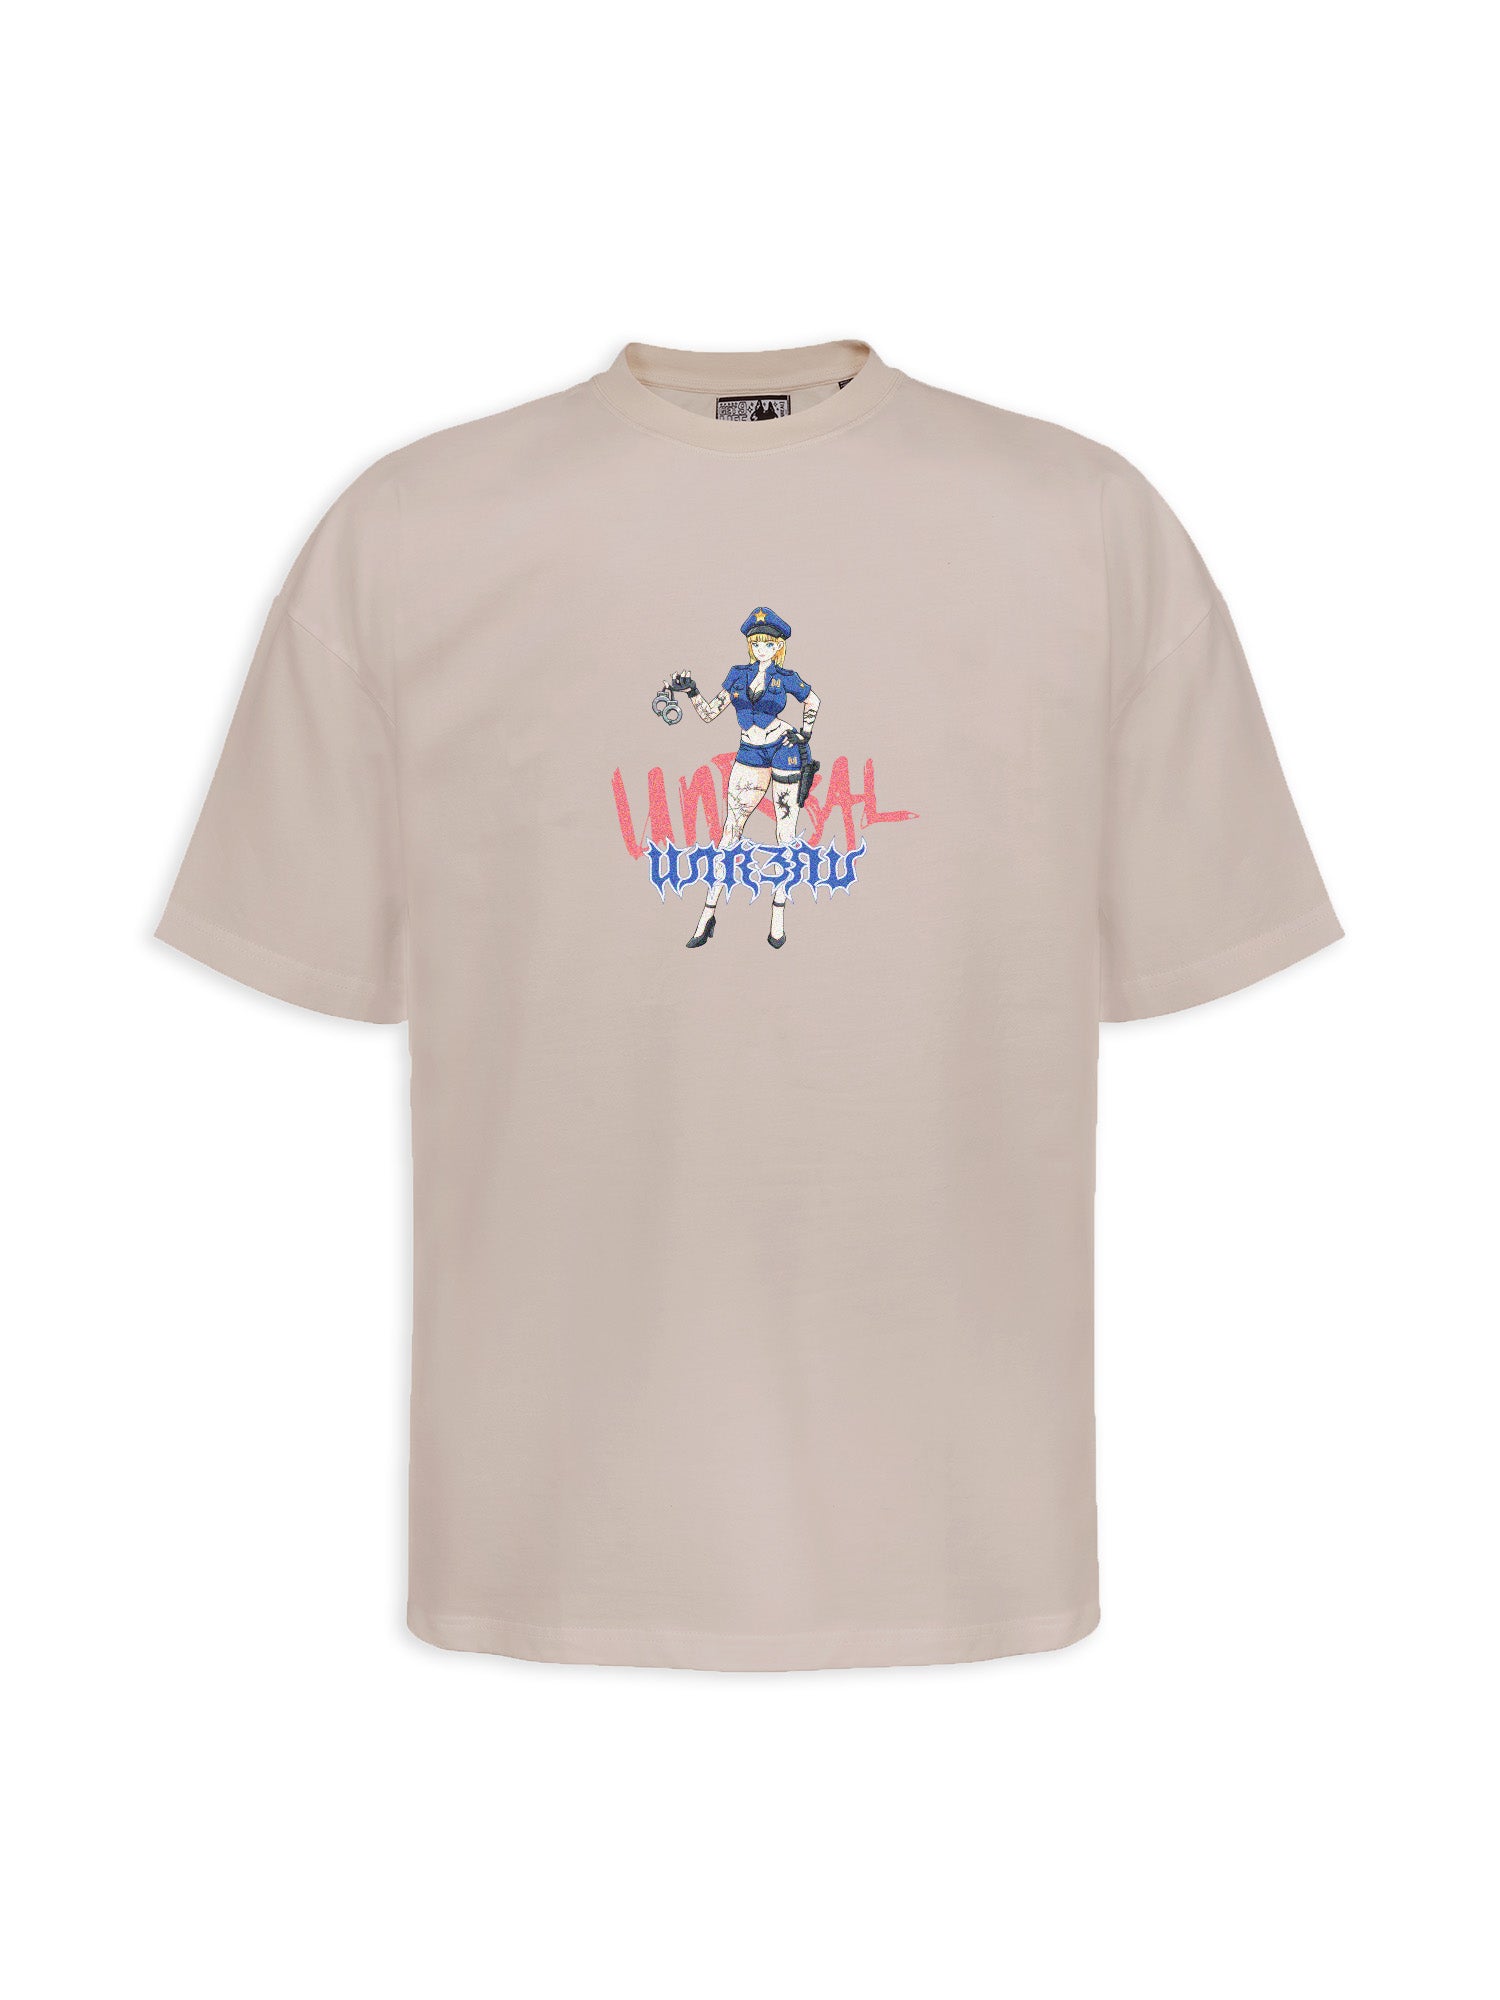 UNREAL stop snitchin' tee in light sand colorway - high quality streetwear - [UNREAL]industries